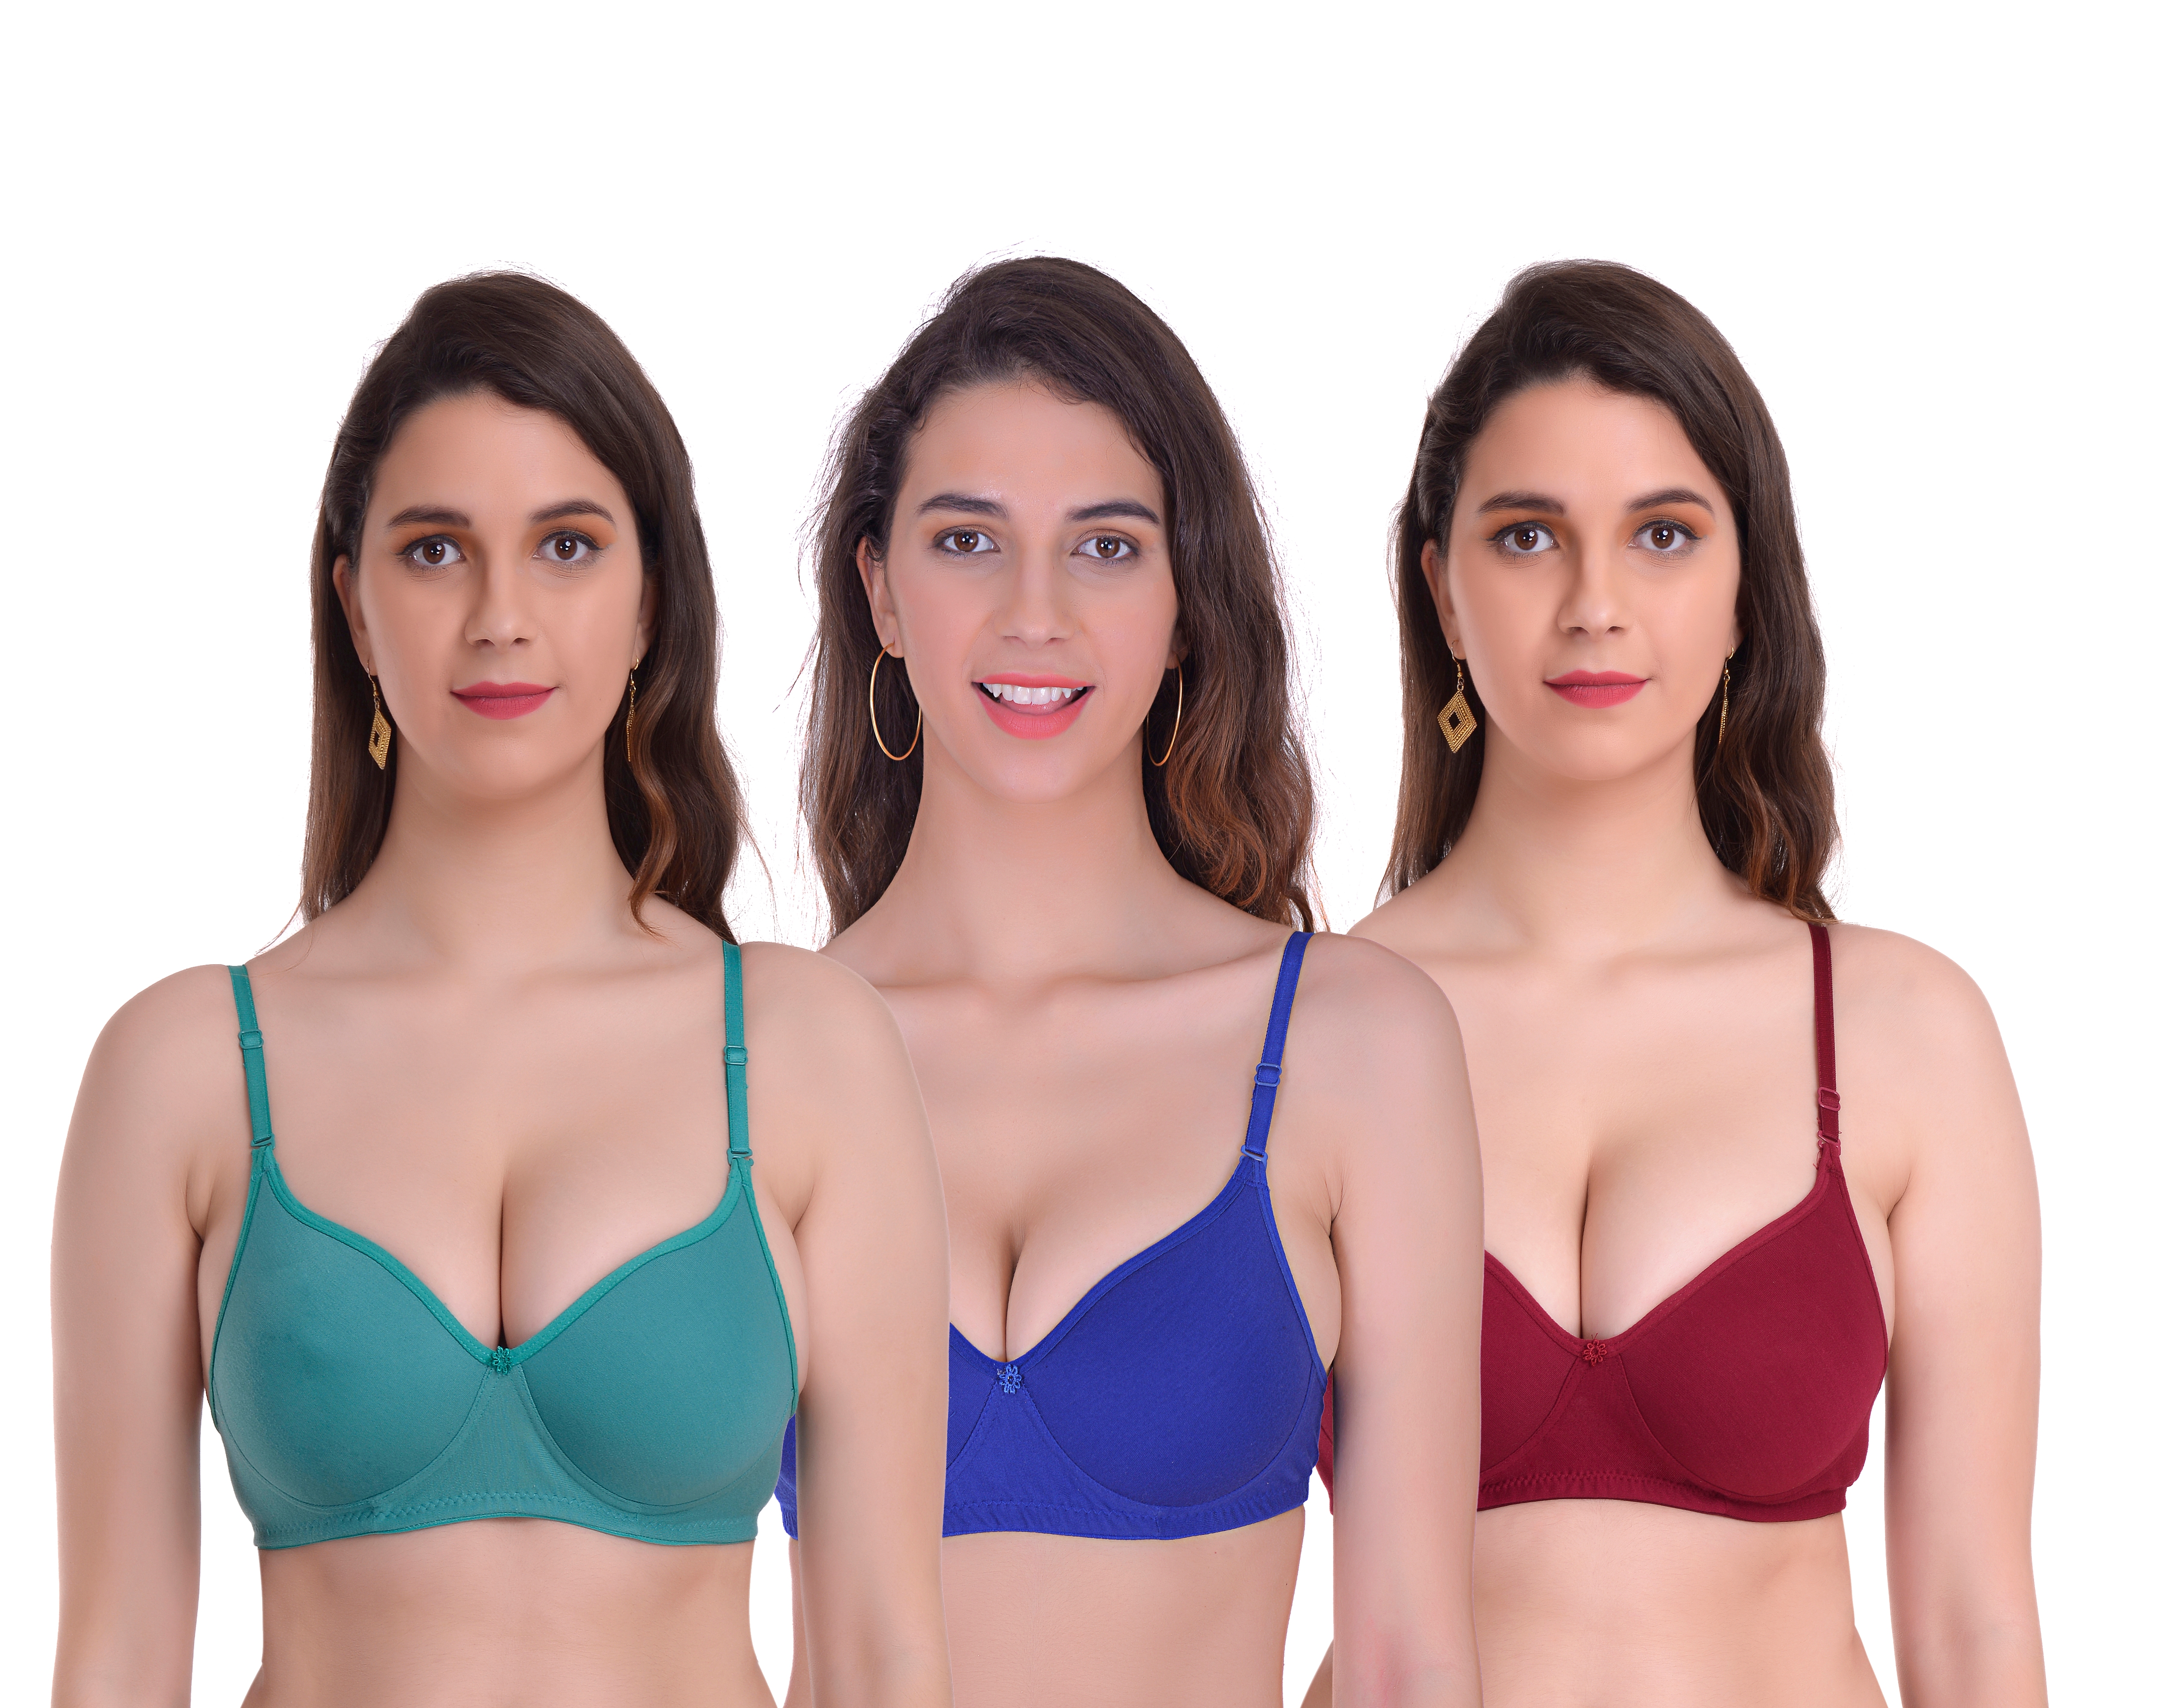 Mynte | Mynte Women's Cotton Rich Lightly Padded Non-Wired Full Cup Regular Bra (Pack of 3) (Green/Blue/Maroon,30) (MY-CPPB-7GBLM-30)